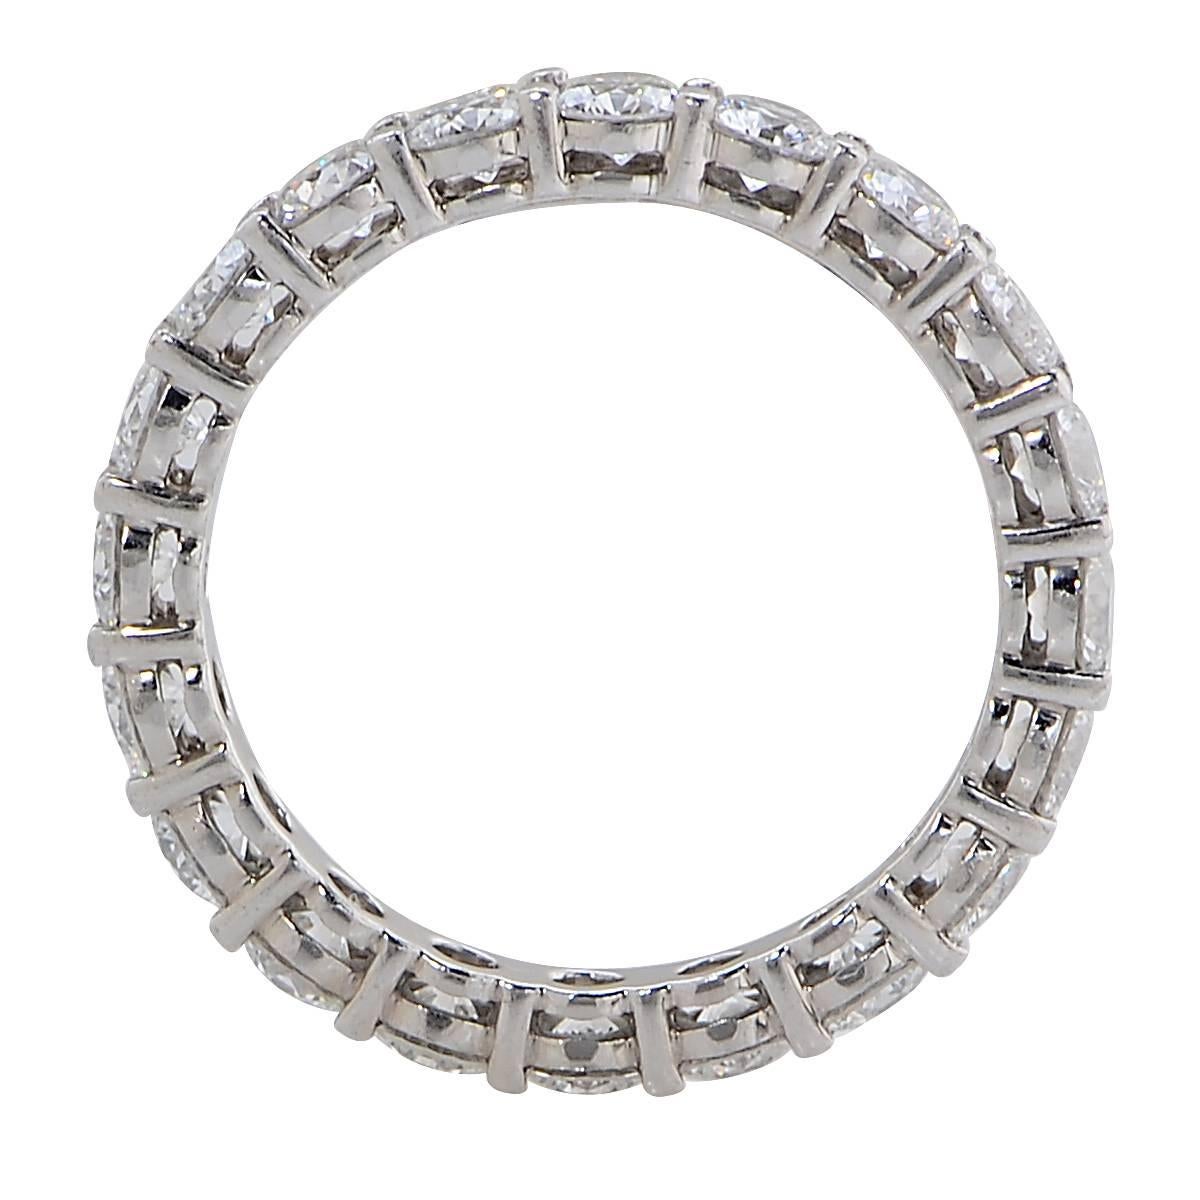 Platinum Tiffany & Co Shared Prong Eternity Band Containing 20 Round Brilliant Cut Diamonds Weighing Approximately 1.75cts, F Color, VS Clarity. The Band is 2.86mm in Width.

Ring Size:4.75
Weight: 4.35 grams

This Tiffany & Co. Diamond Band is